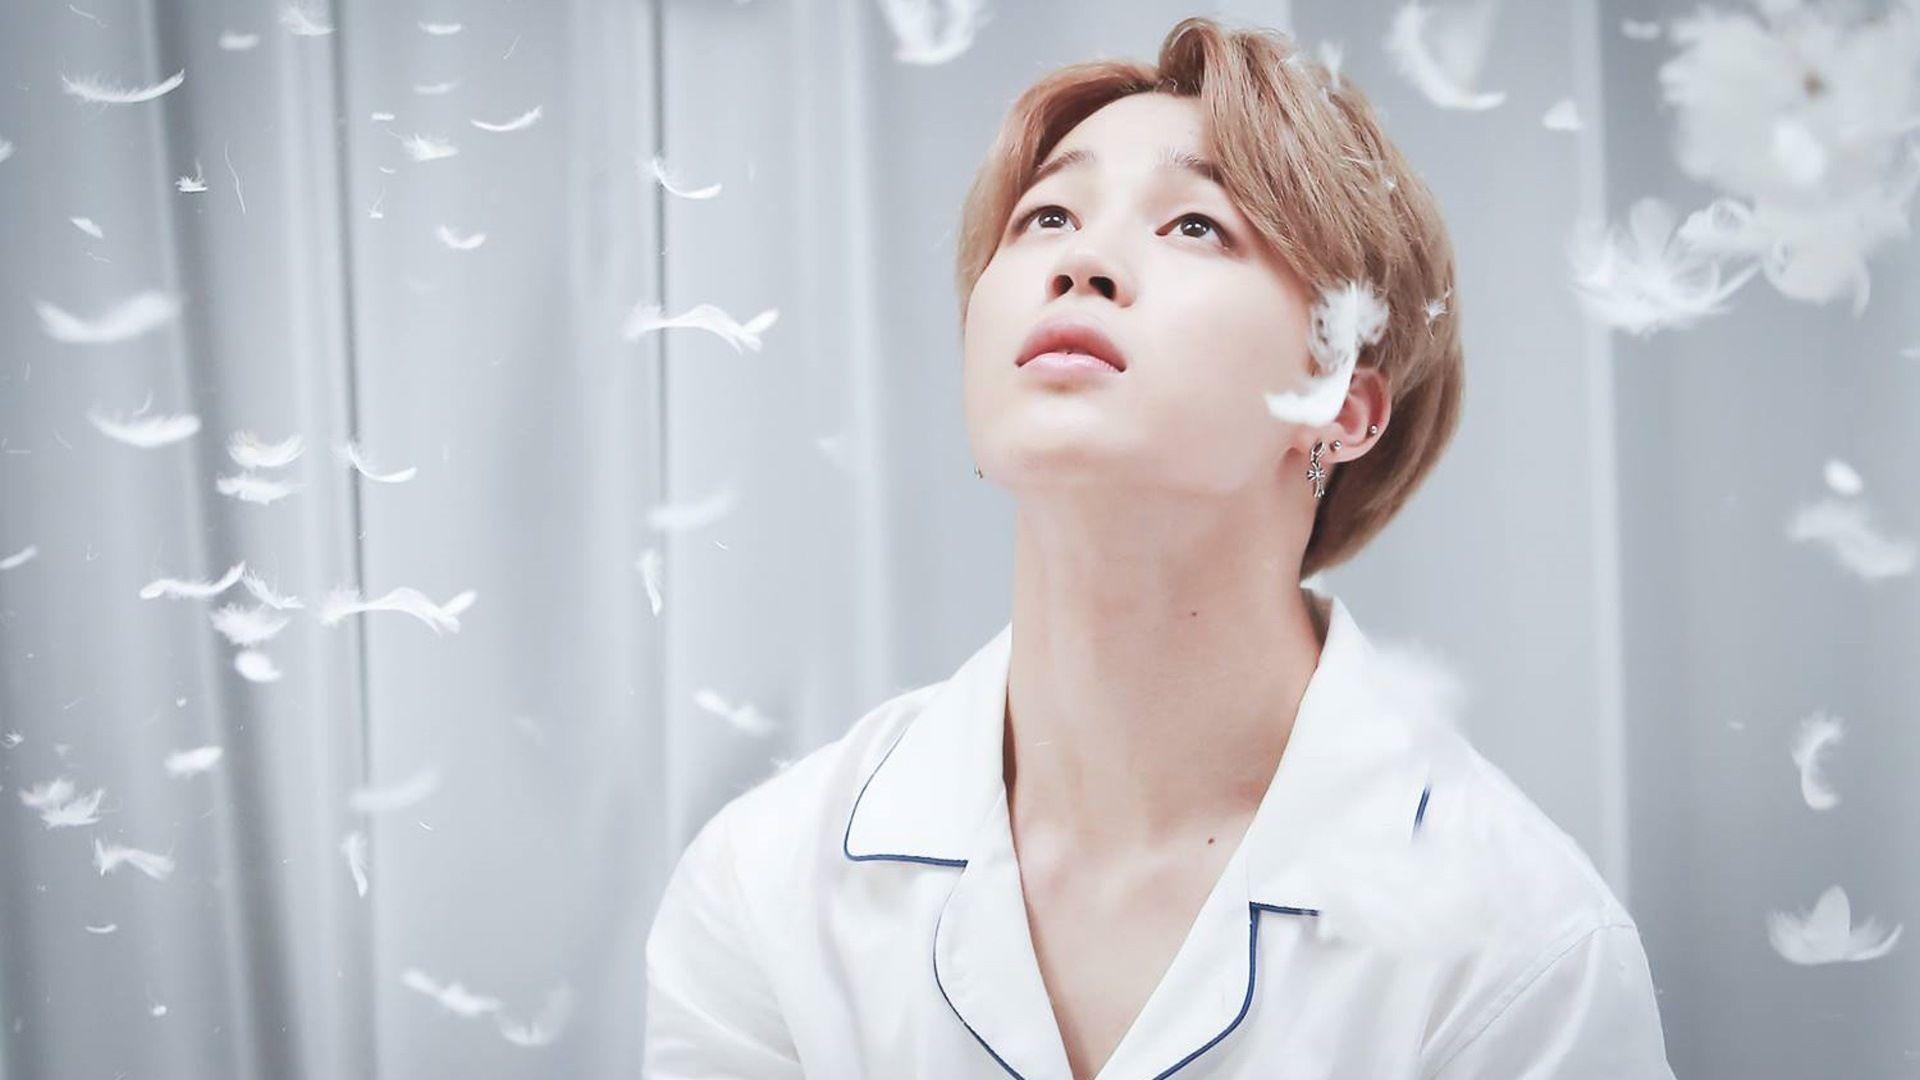 A Jungkook wallpaper with him looking up at falling feathers - Jimin